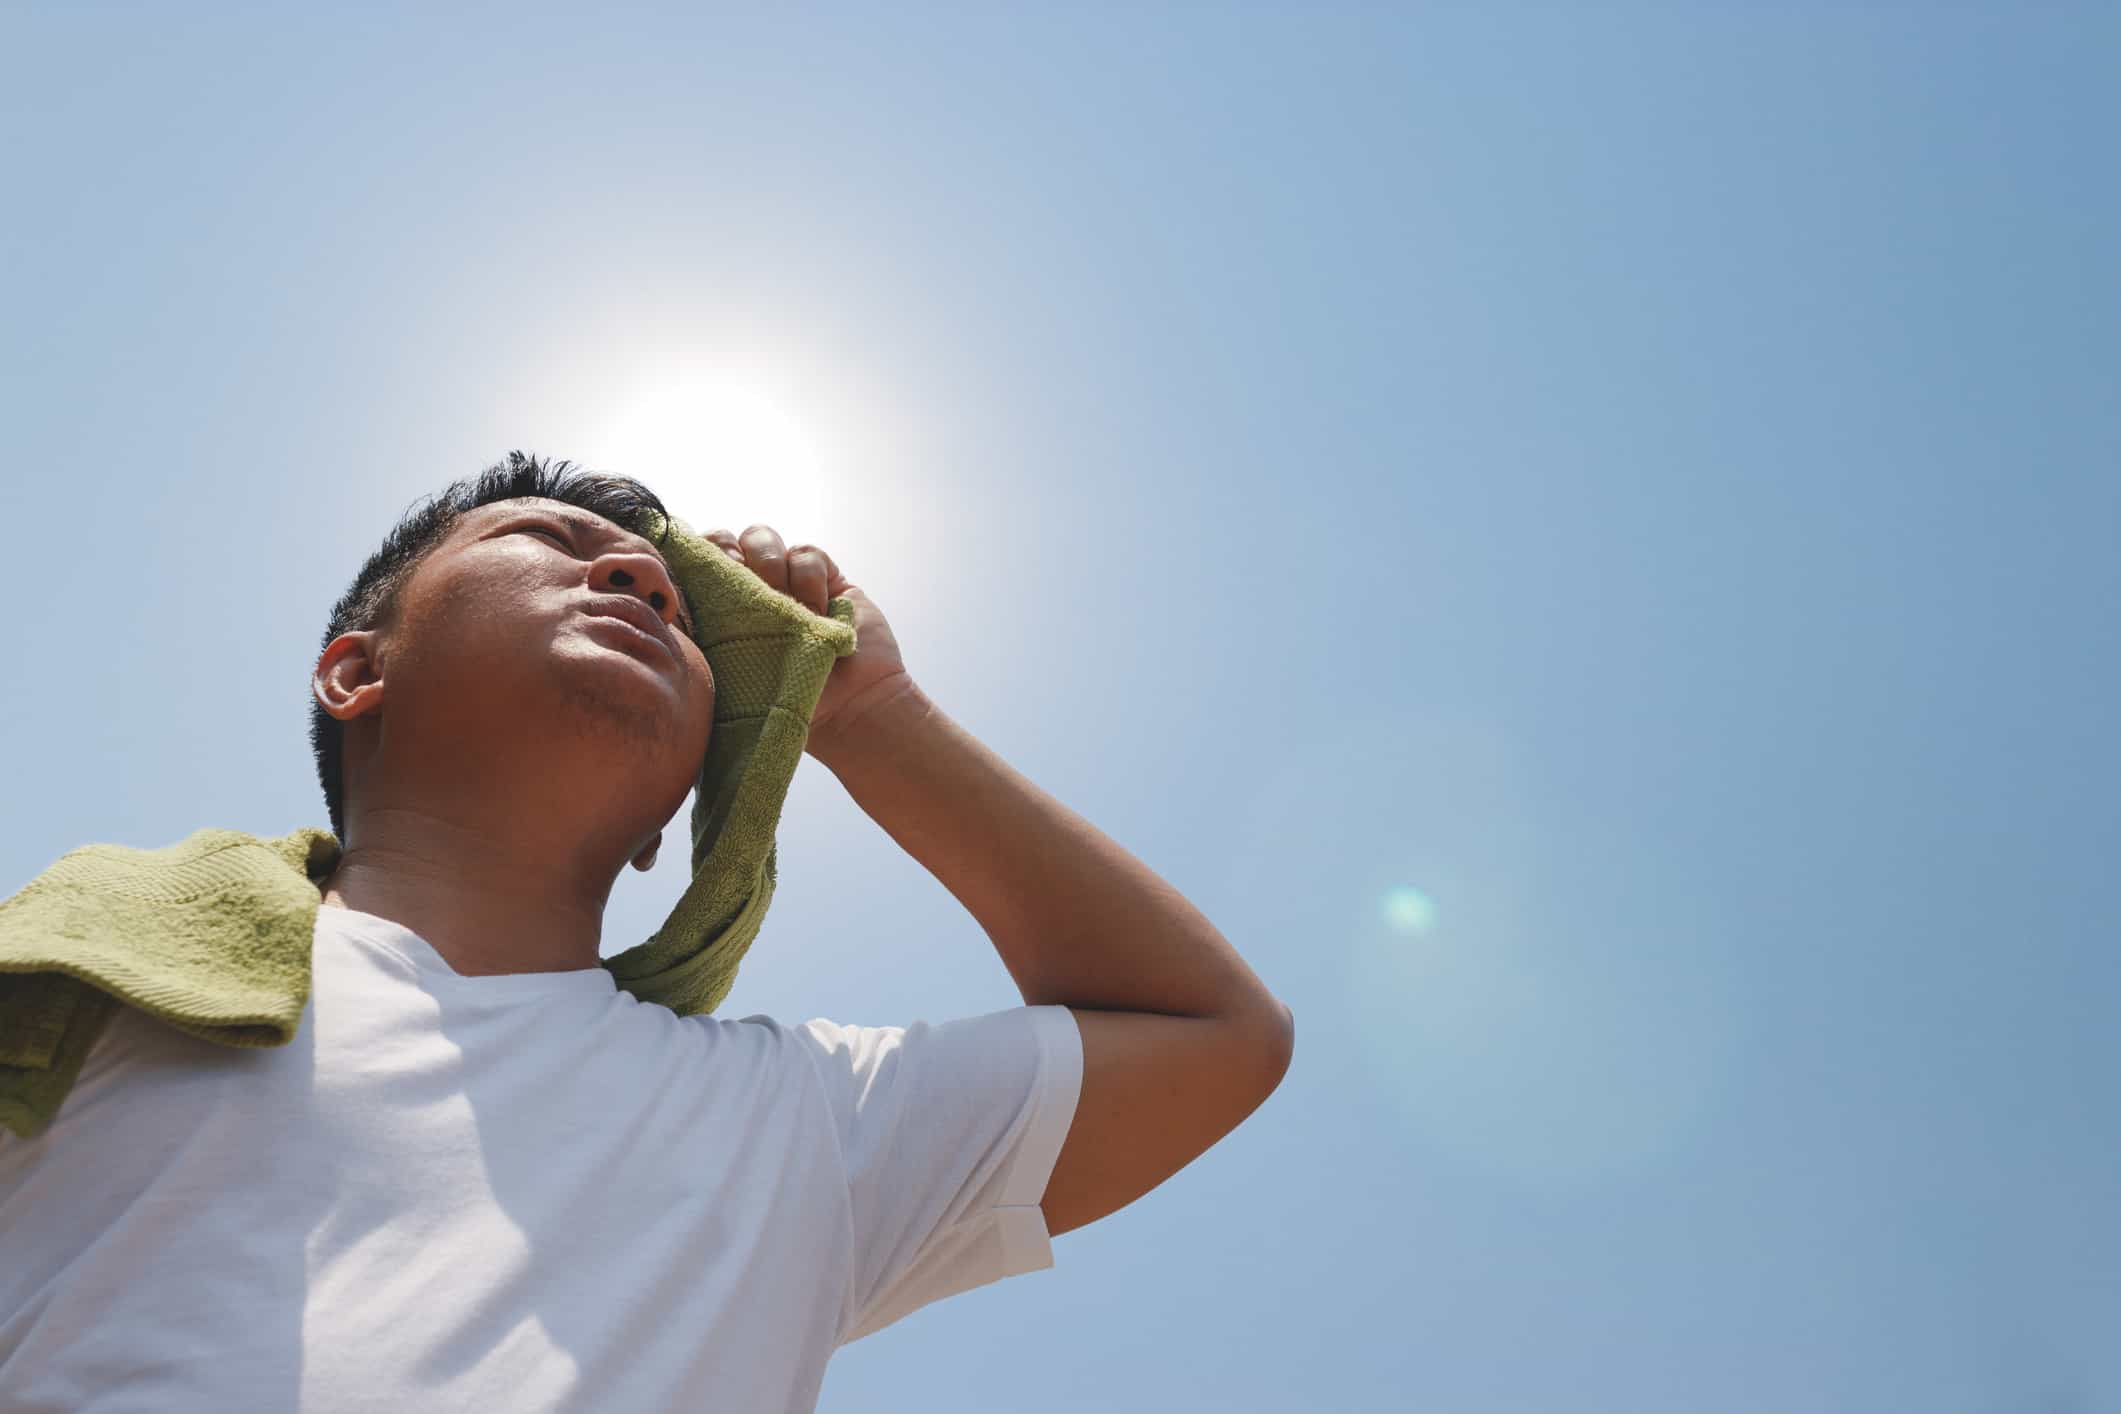 If you are experiencing heatstroke symptoms, contact emergency help immediately.